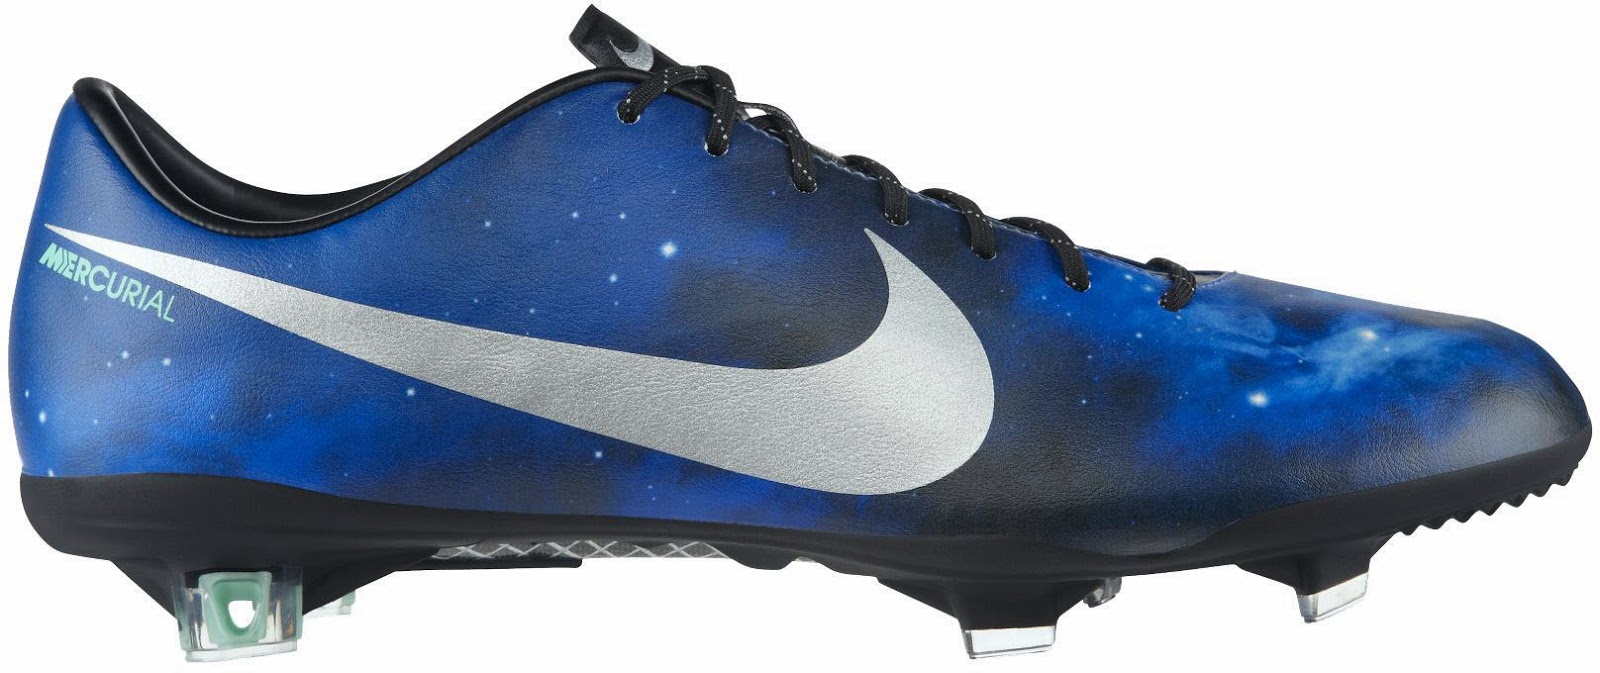 Nike Mercurial Vapor 11 Play Ice Boot Review YouTube